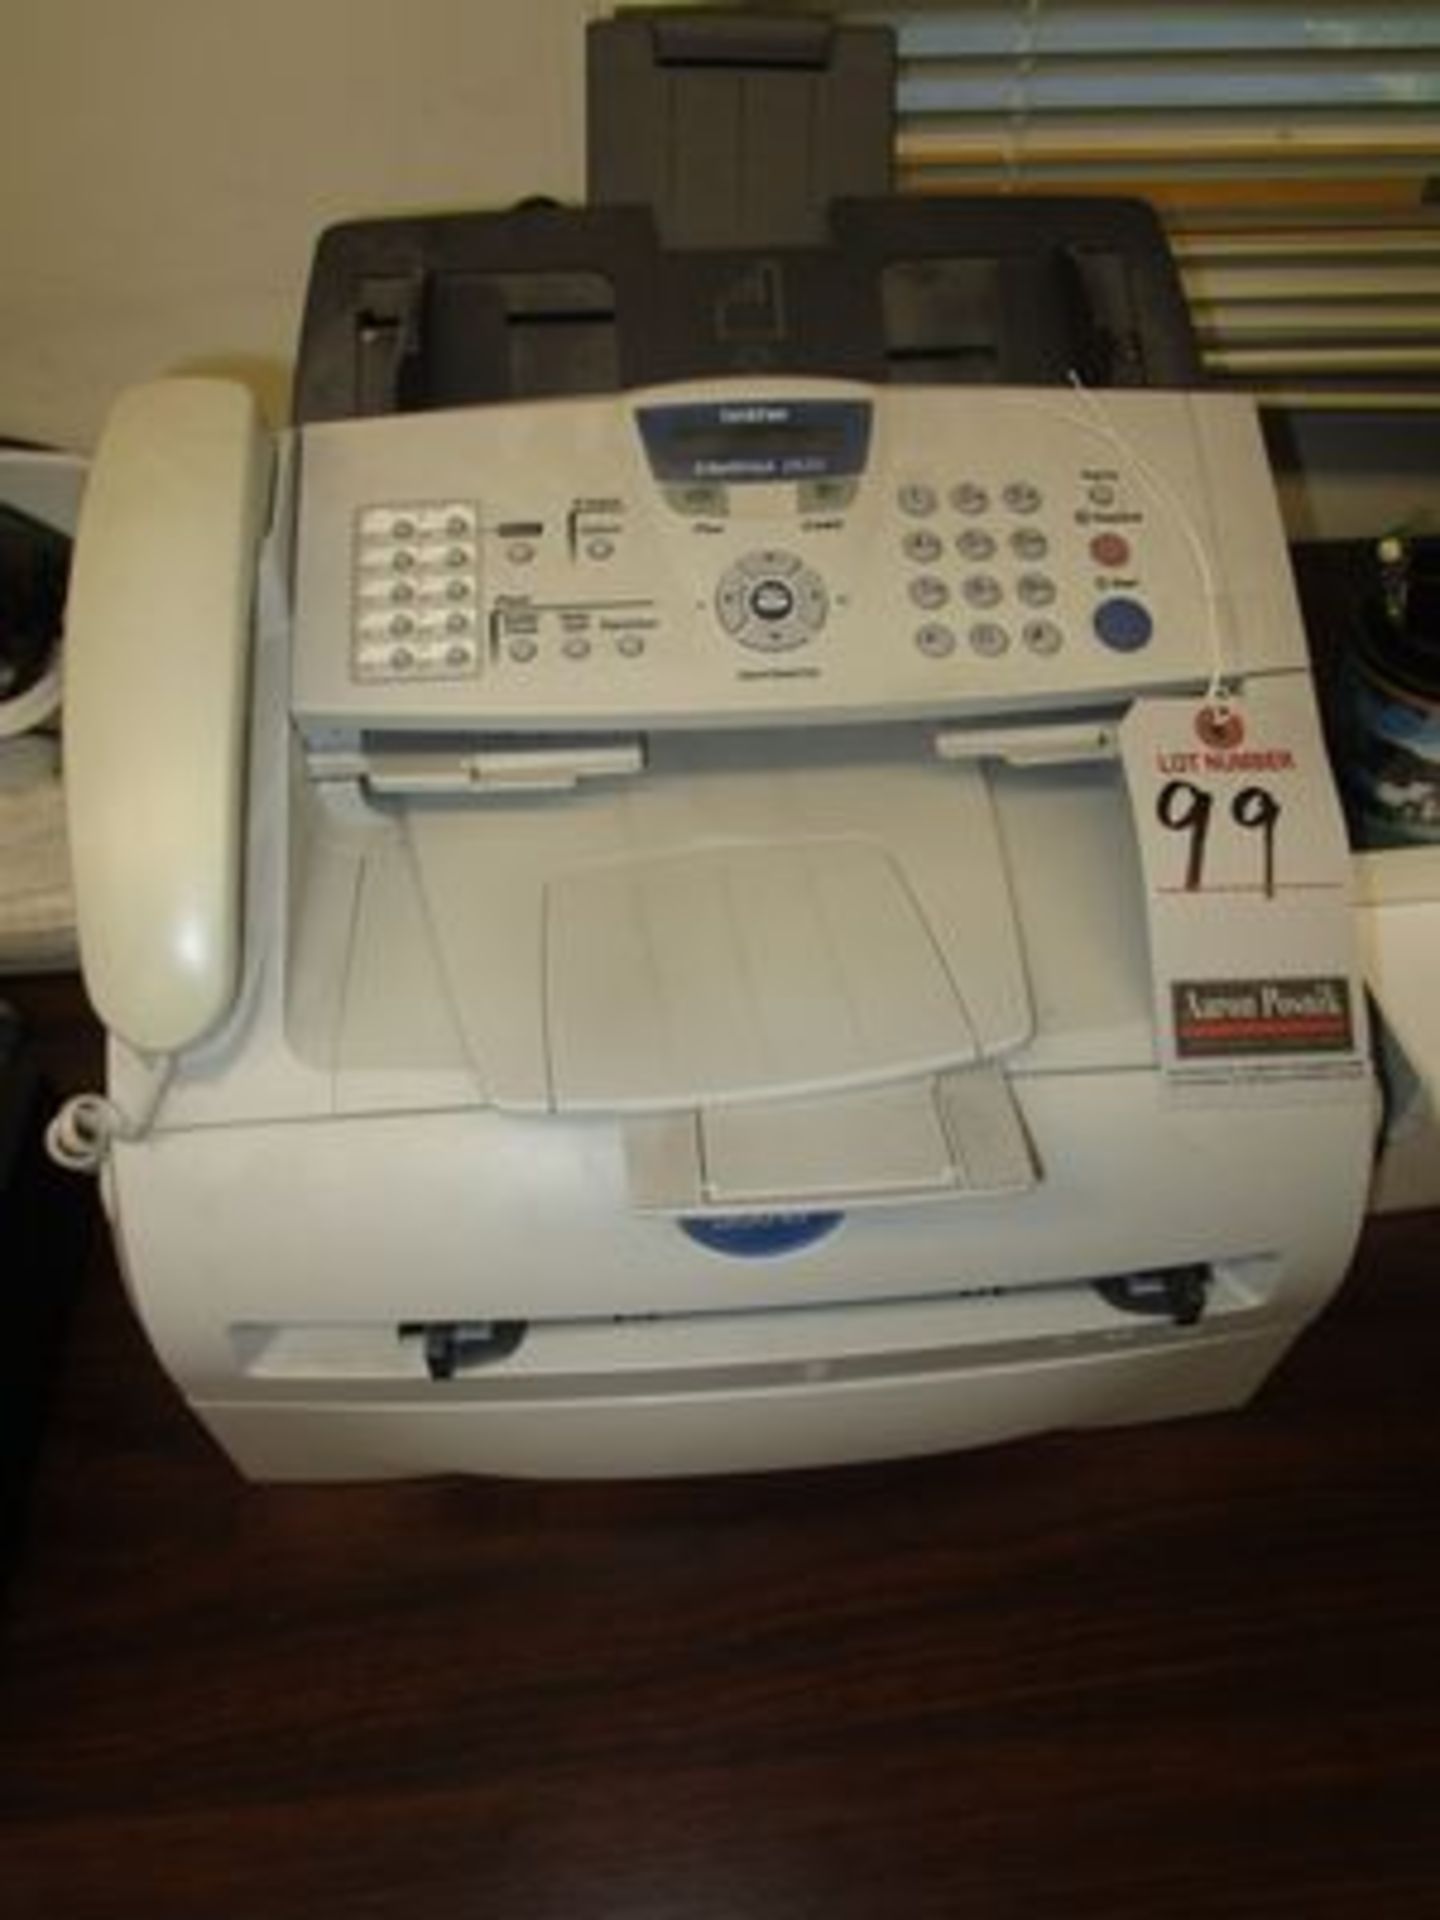 BROTHER INTELL IFAX 2820 FAX MACHINE